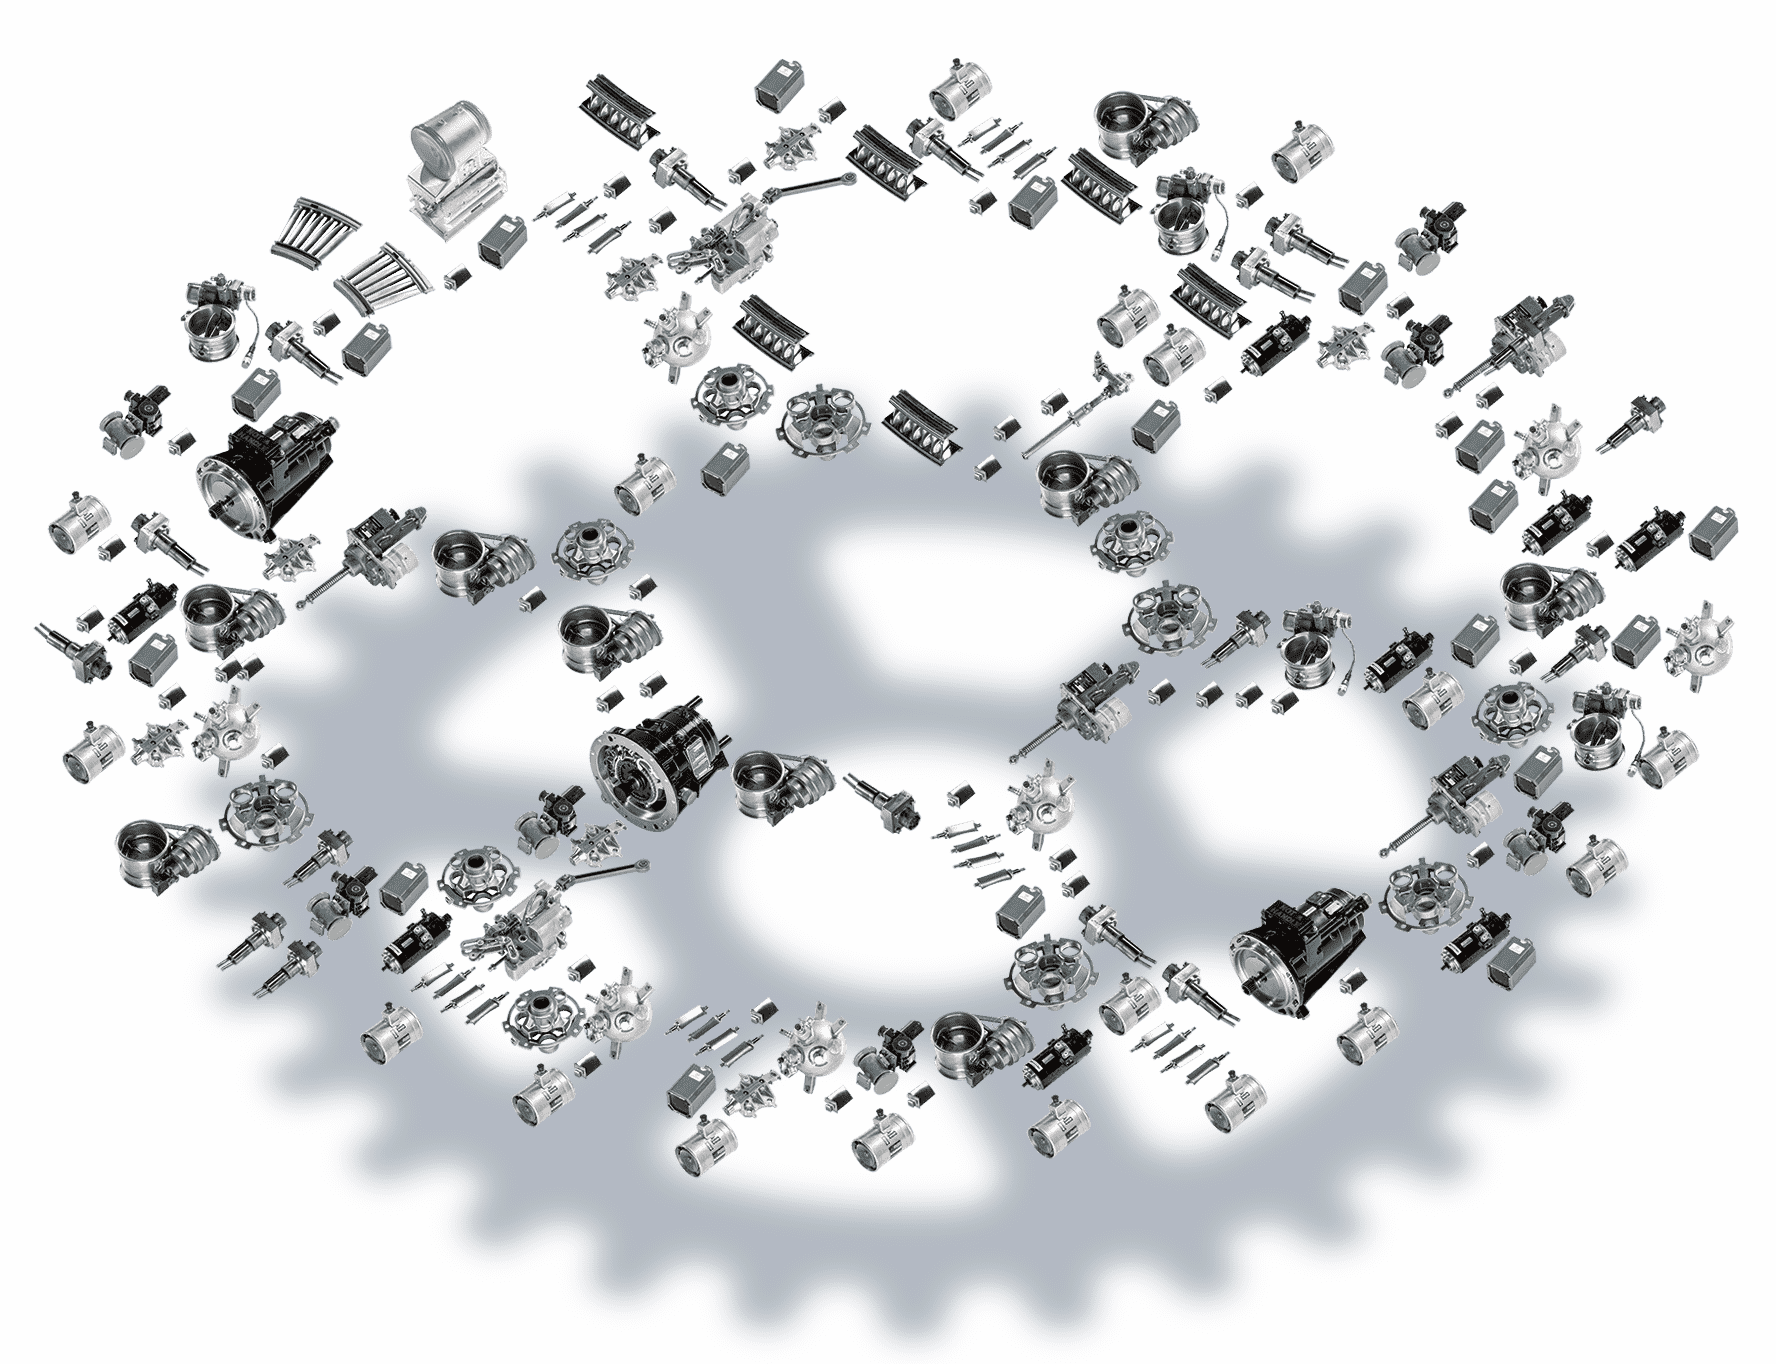 Photoshop of cog made from airplane components